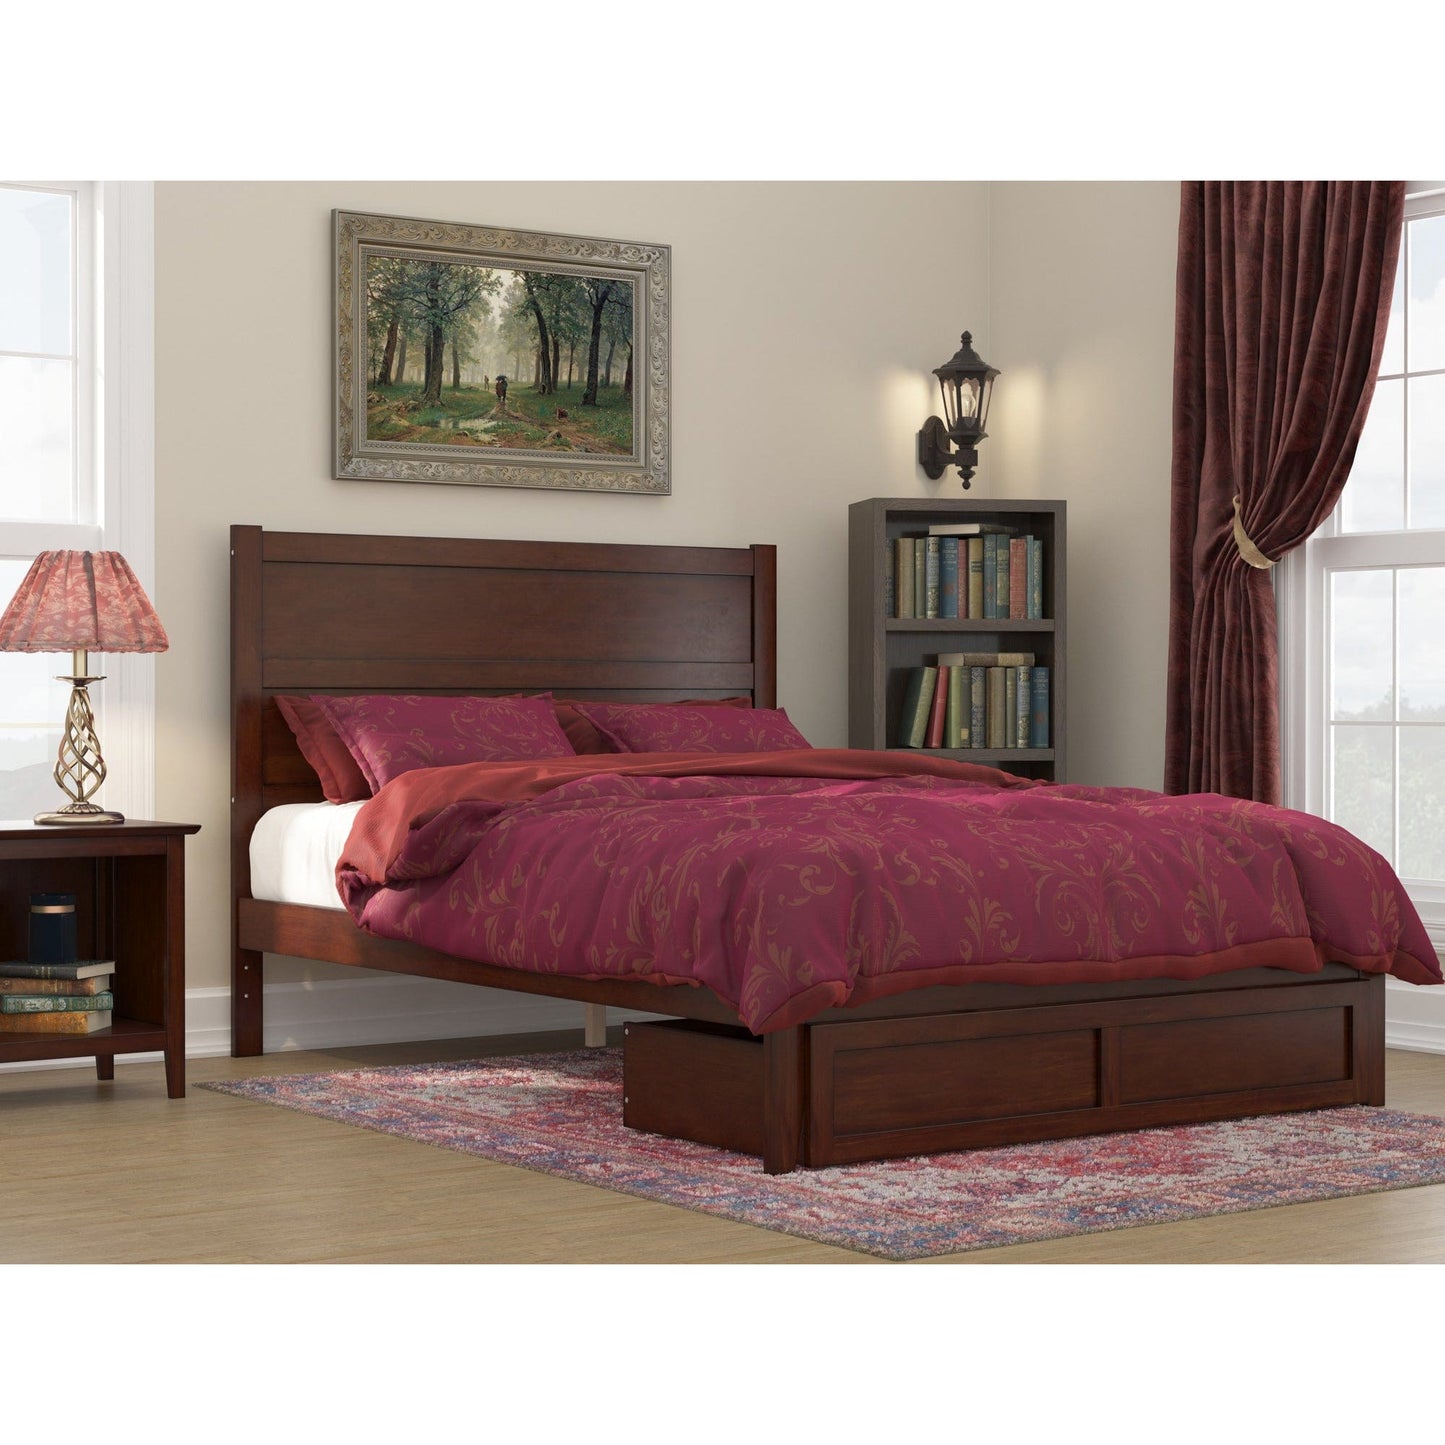 AFI Furnishings NoHo Queen Bed with Foot Drawer in Walnut AG9112444